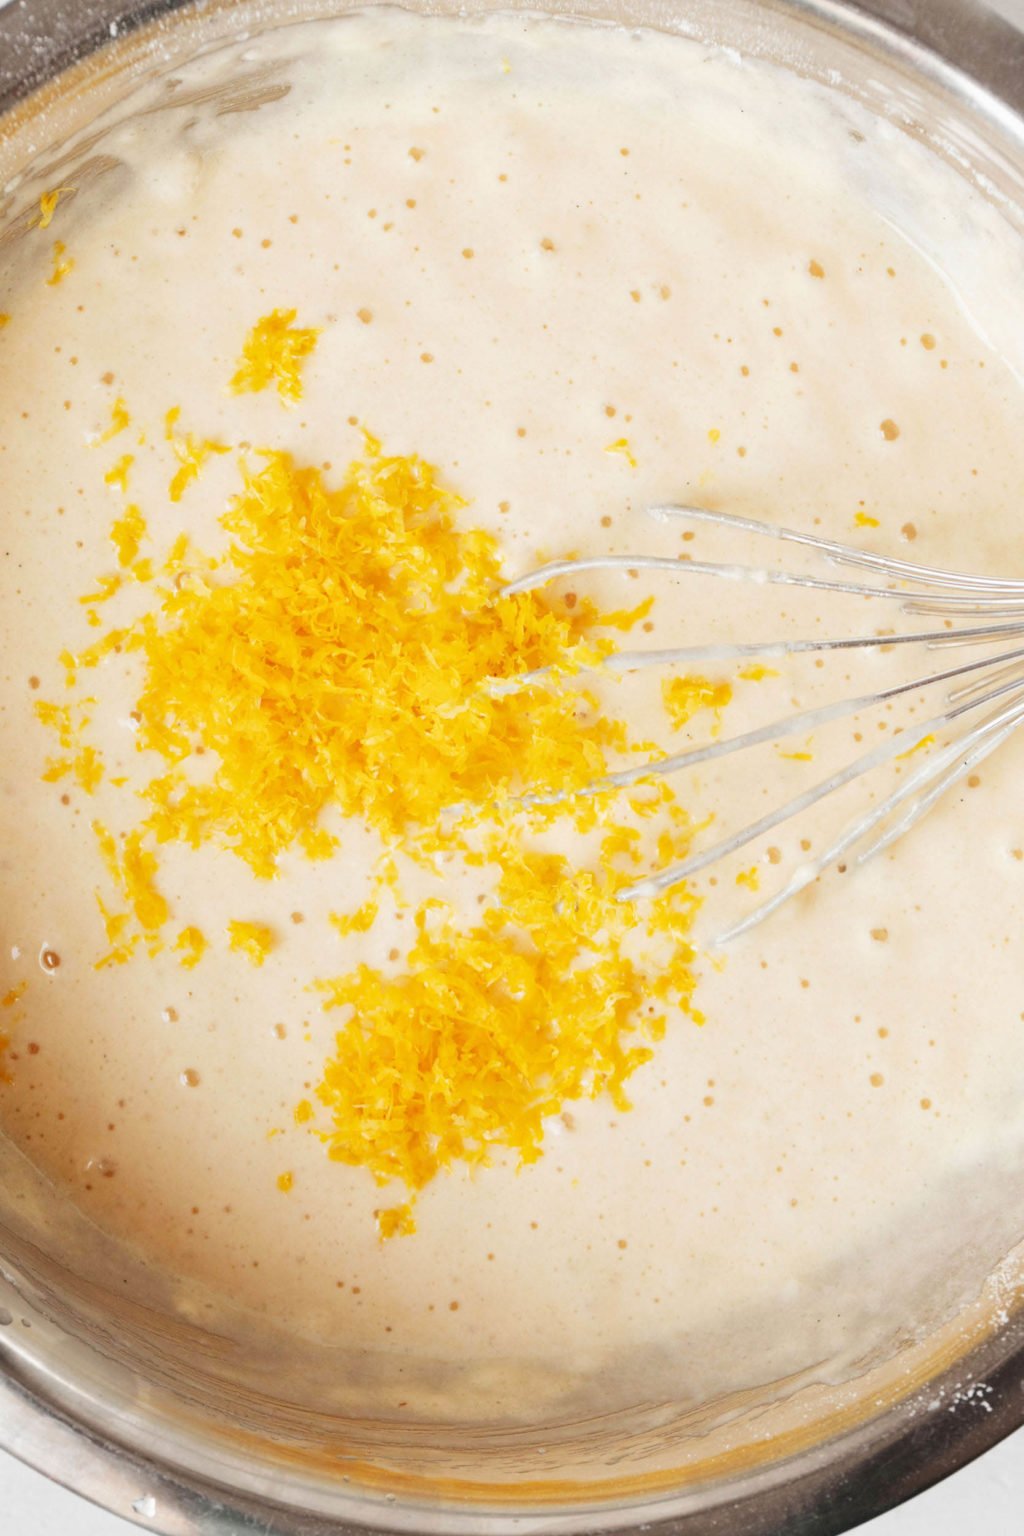 A pale, yellow batter for baking is being whisked with bright yellow lemon zest.